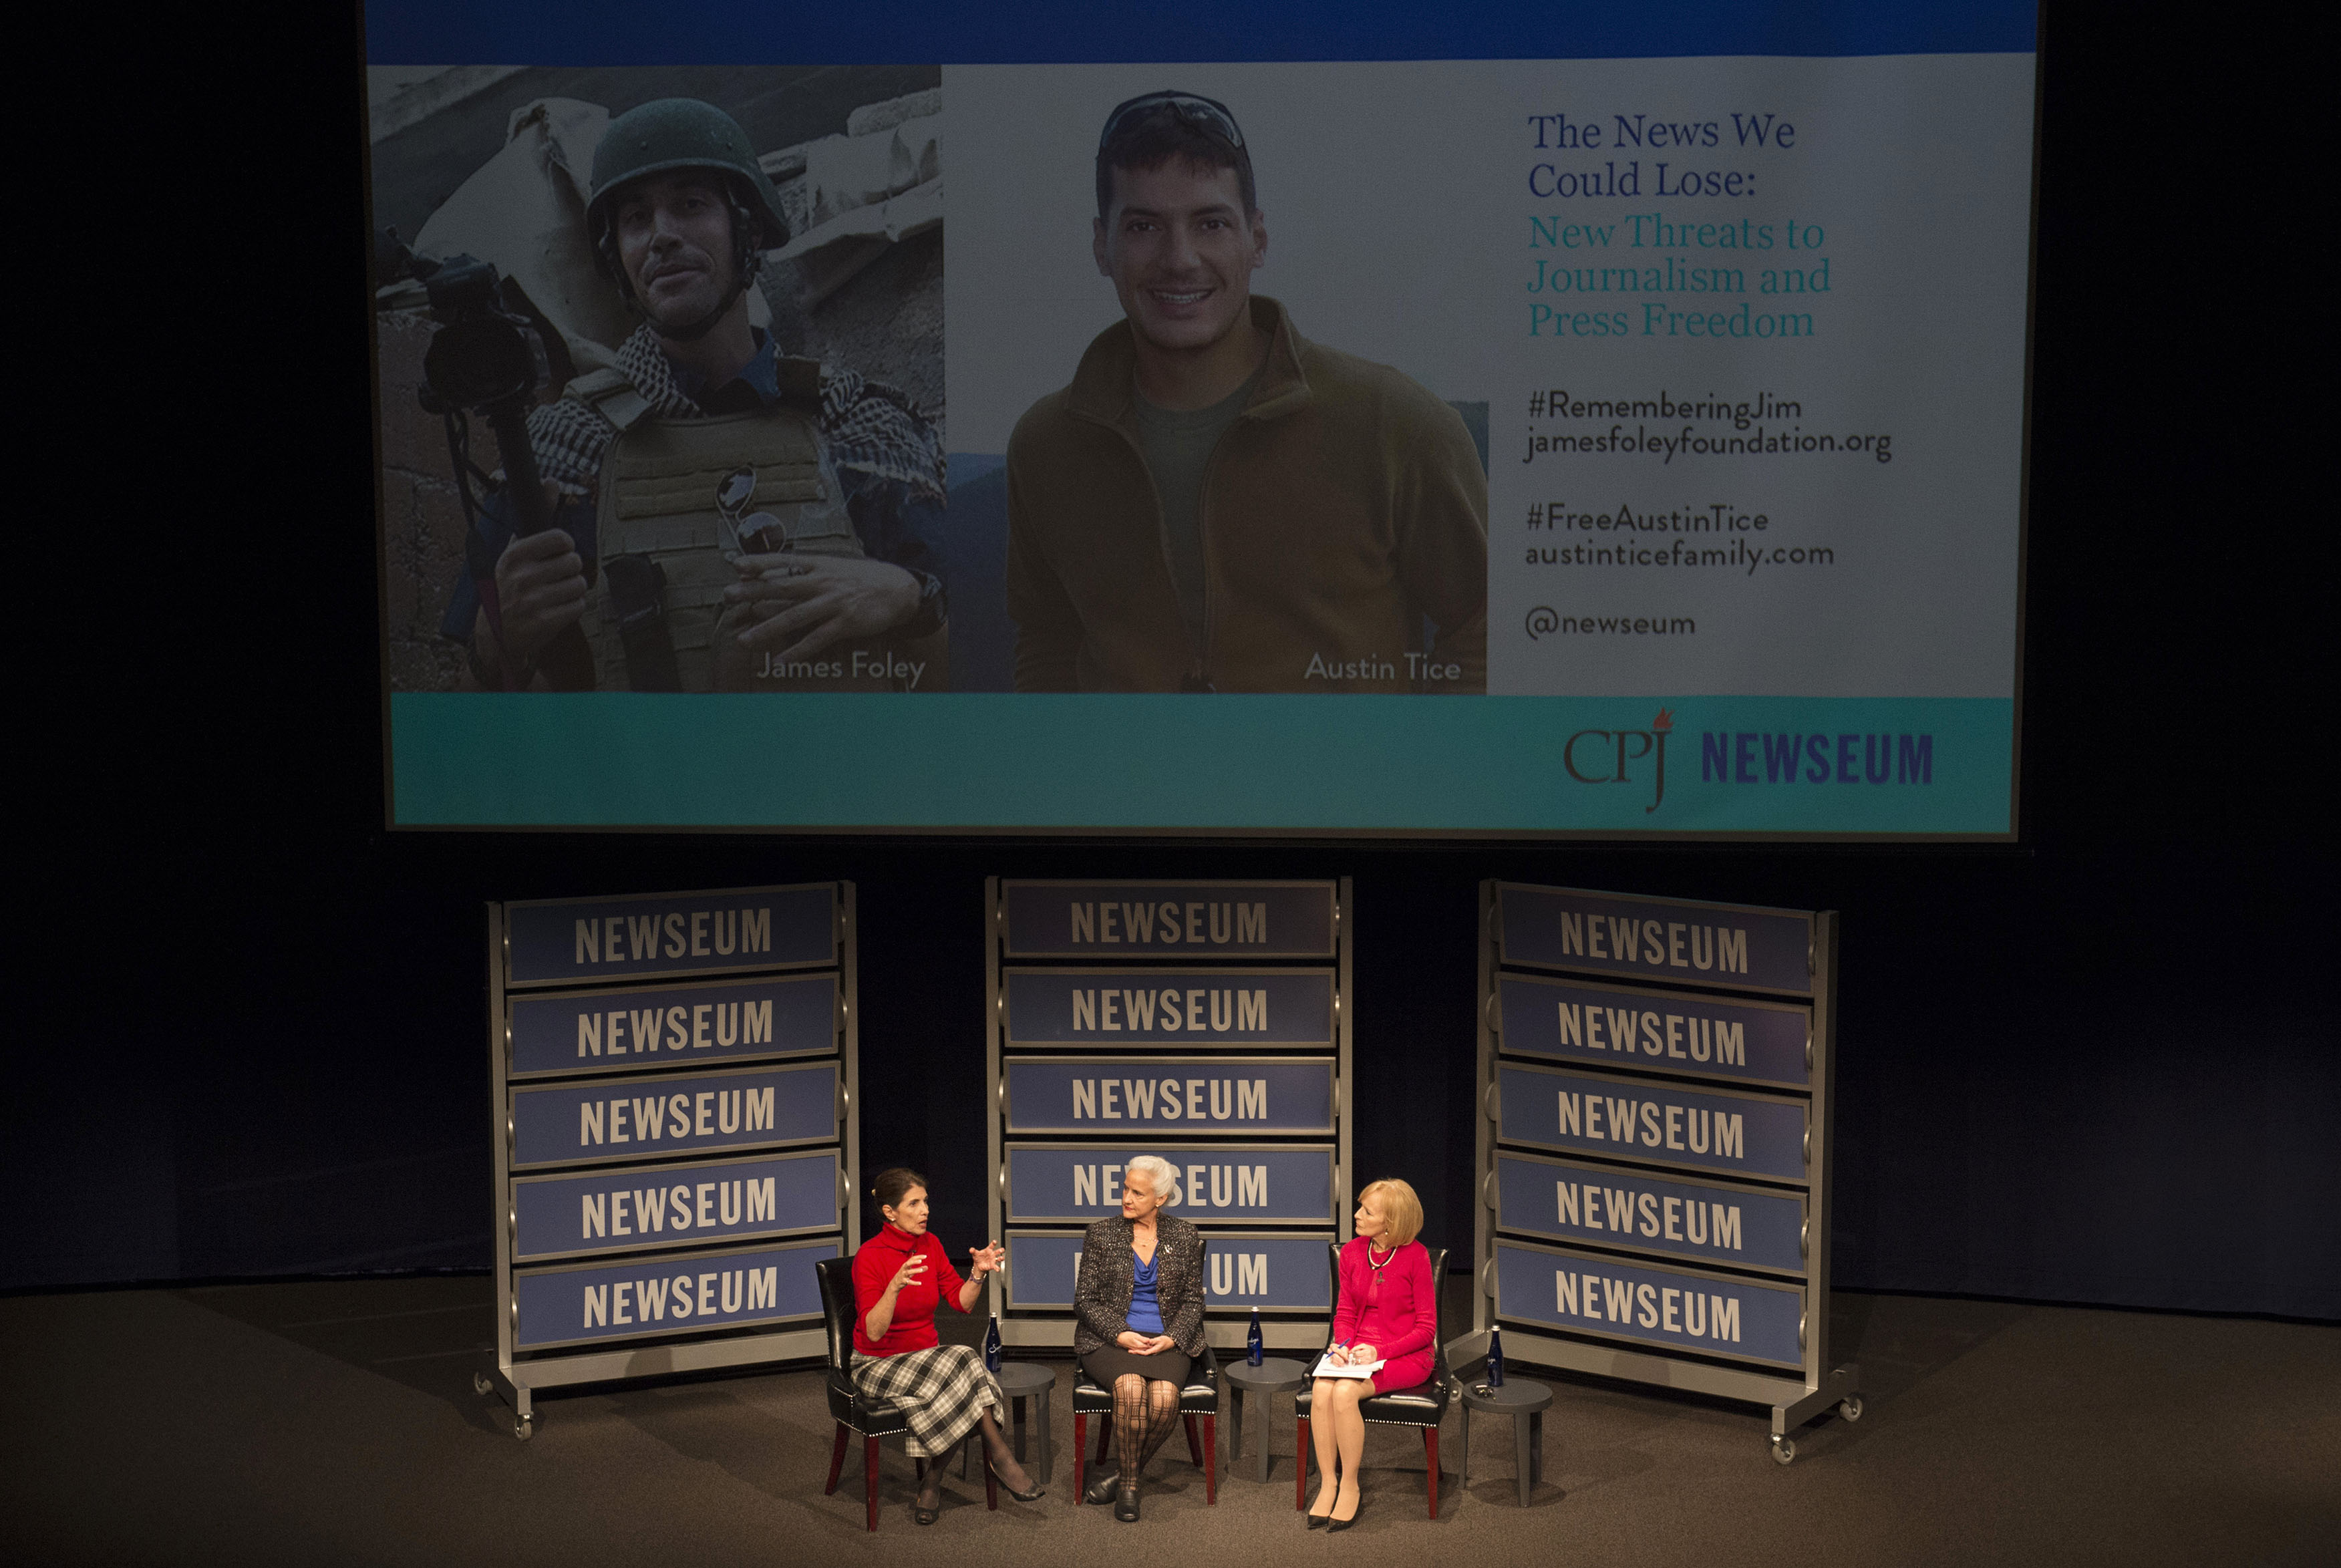 Diane Foley, left, mother of James Foley, the photojournalist killed by Islamic State militants in 2014, and Debra Tice, mother of freelance journalist Austin Tice, who has been missing since he was taken captive in Syria in 2012, take part in a forum at the Newseum in Washington on February 4, 2015. (AP/Molly Riley)